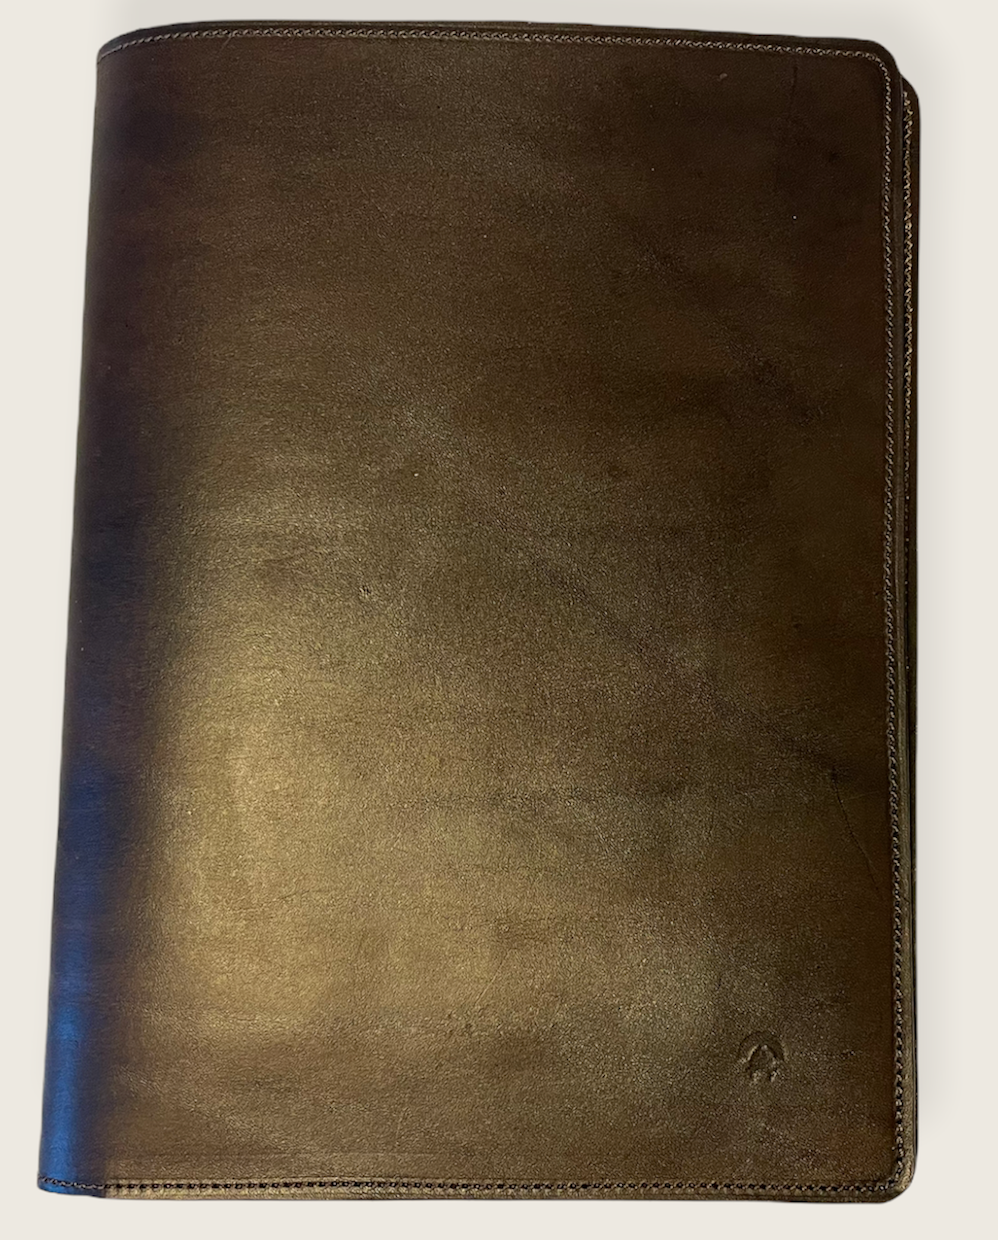 Standard Legal Pad cover